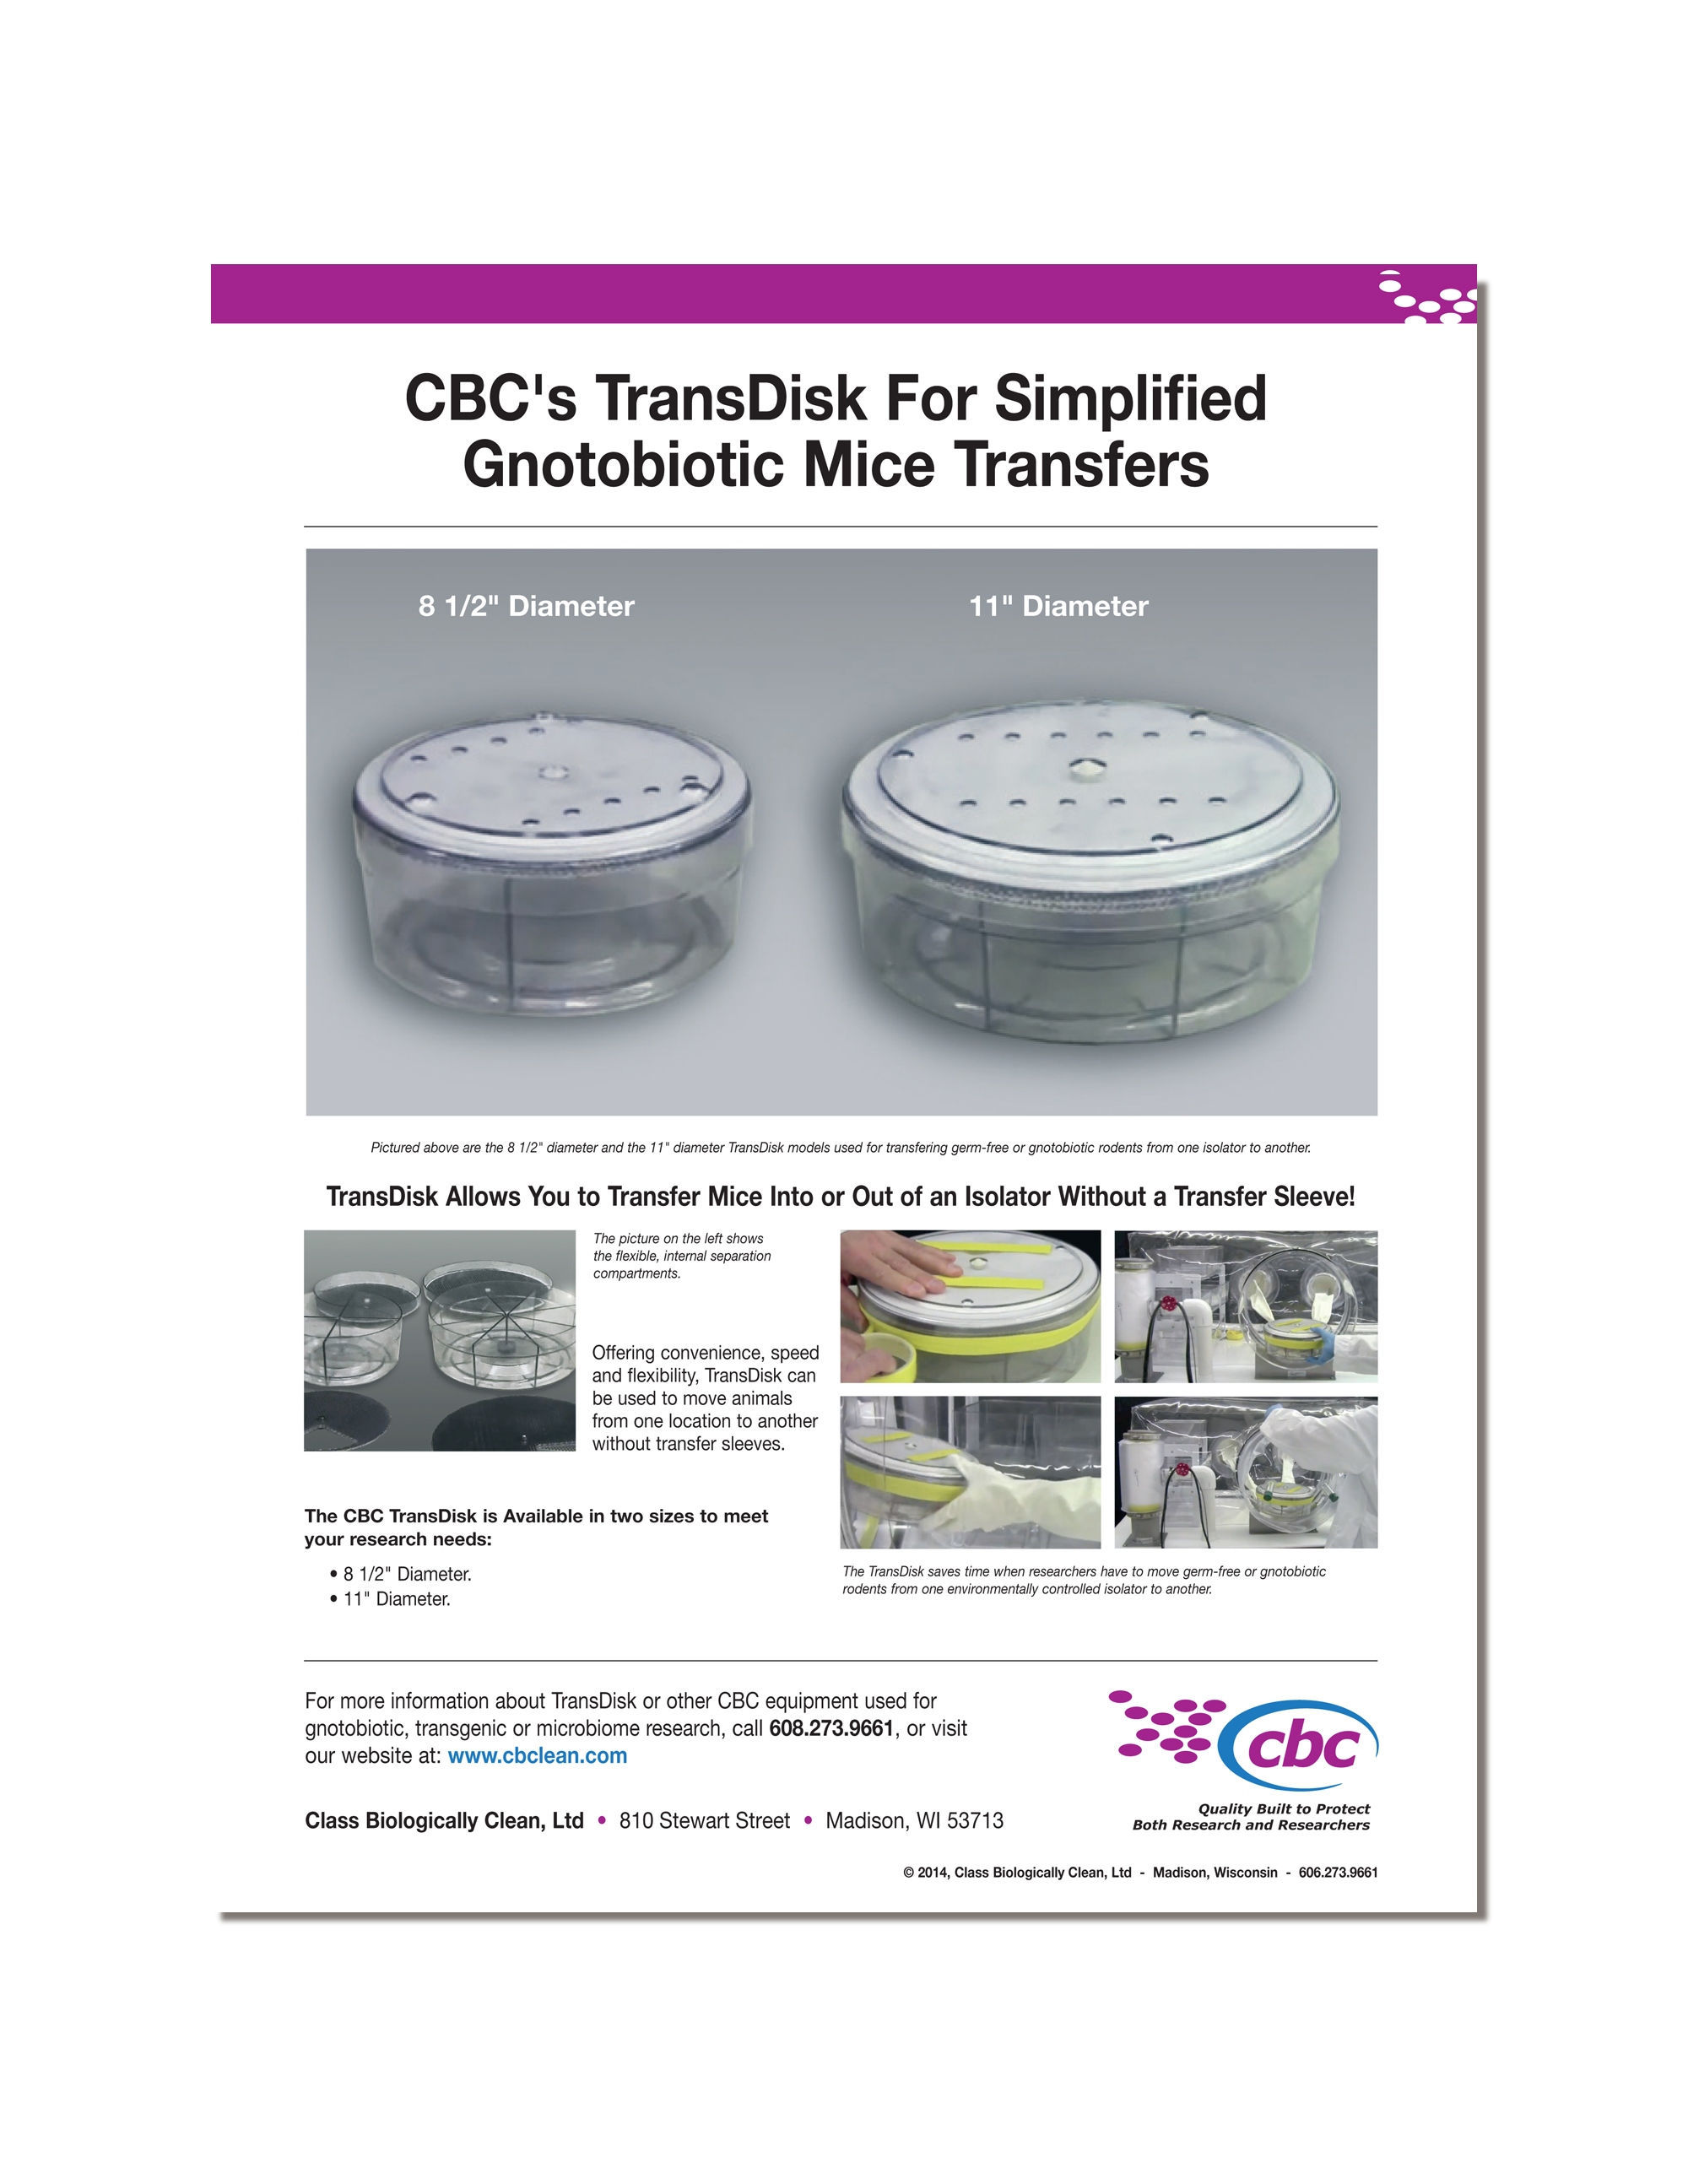 The CBC TransDisk gnotobiotic mice transfer system. Click here to download flyer.